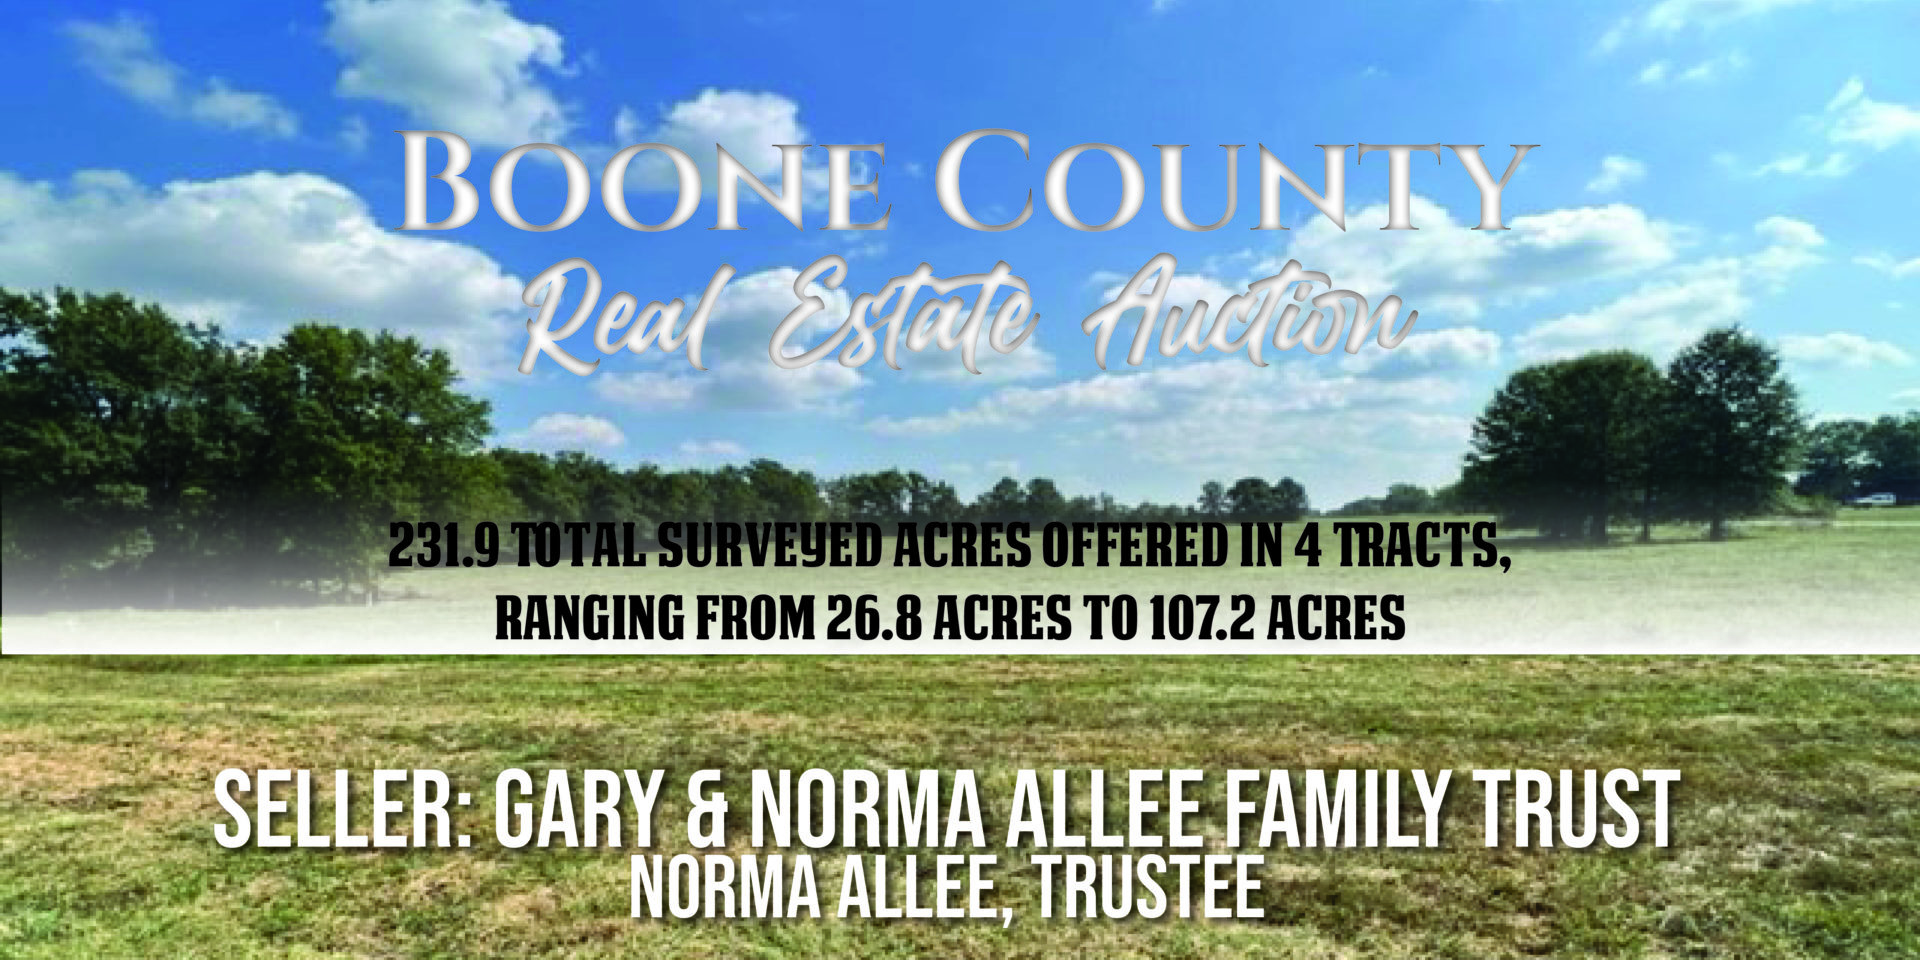 Boone County Real Estate Auction